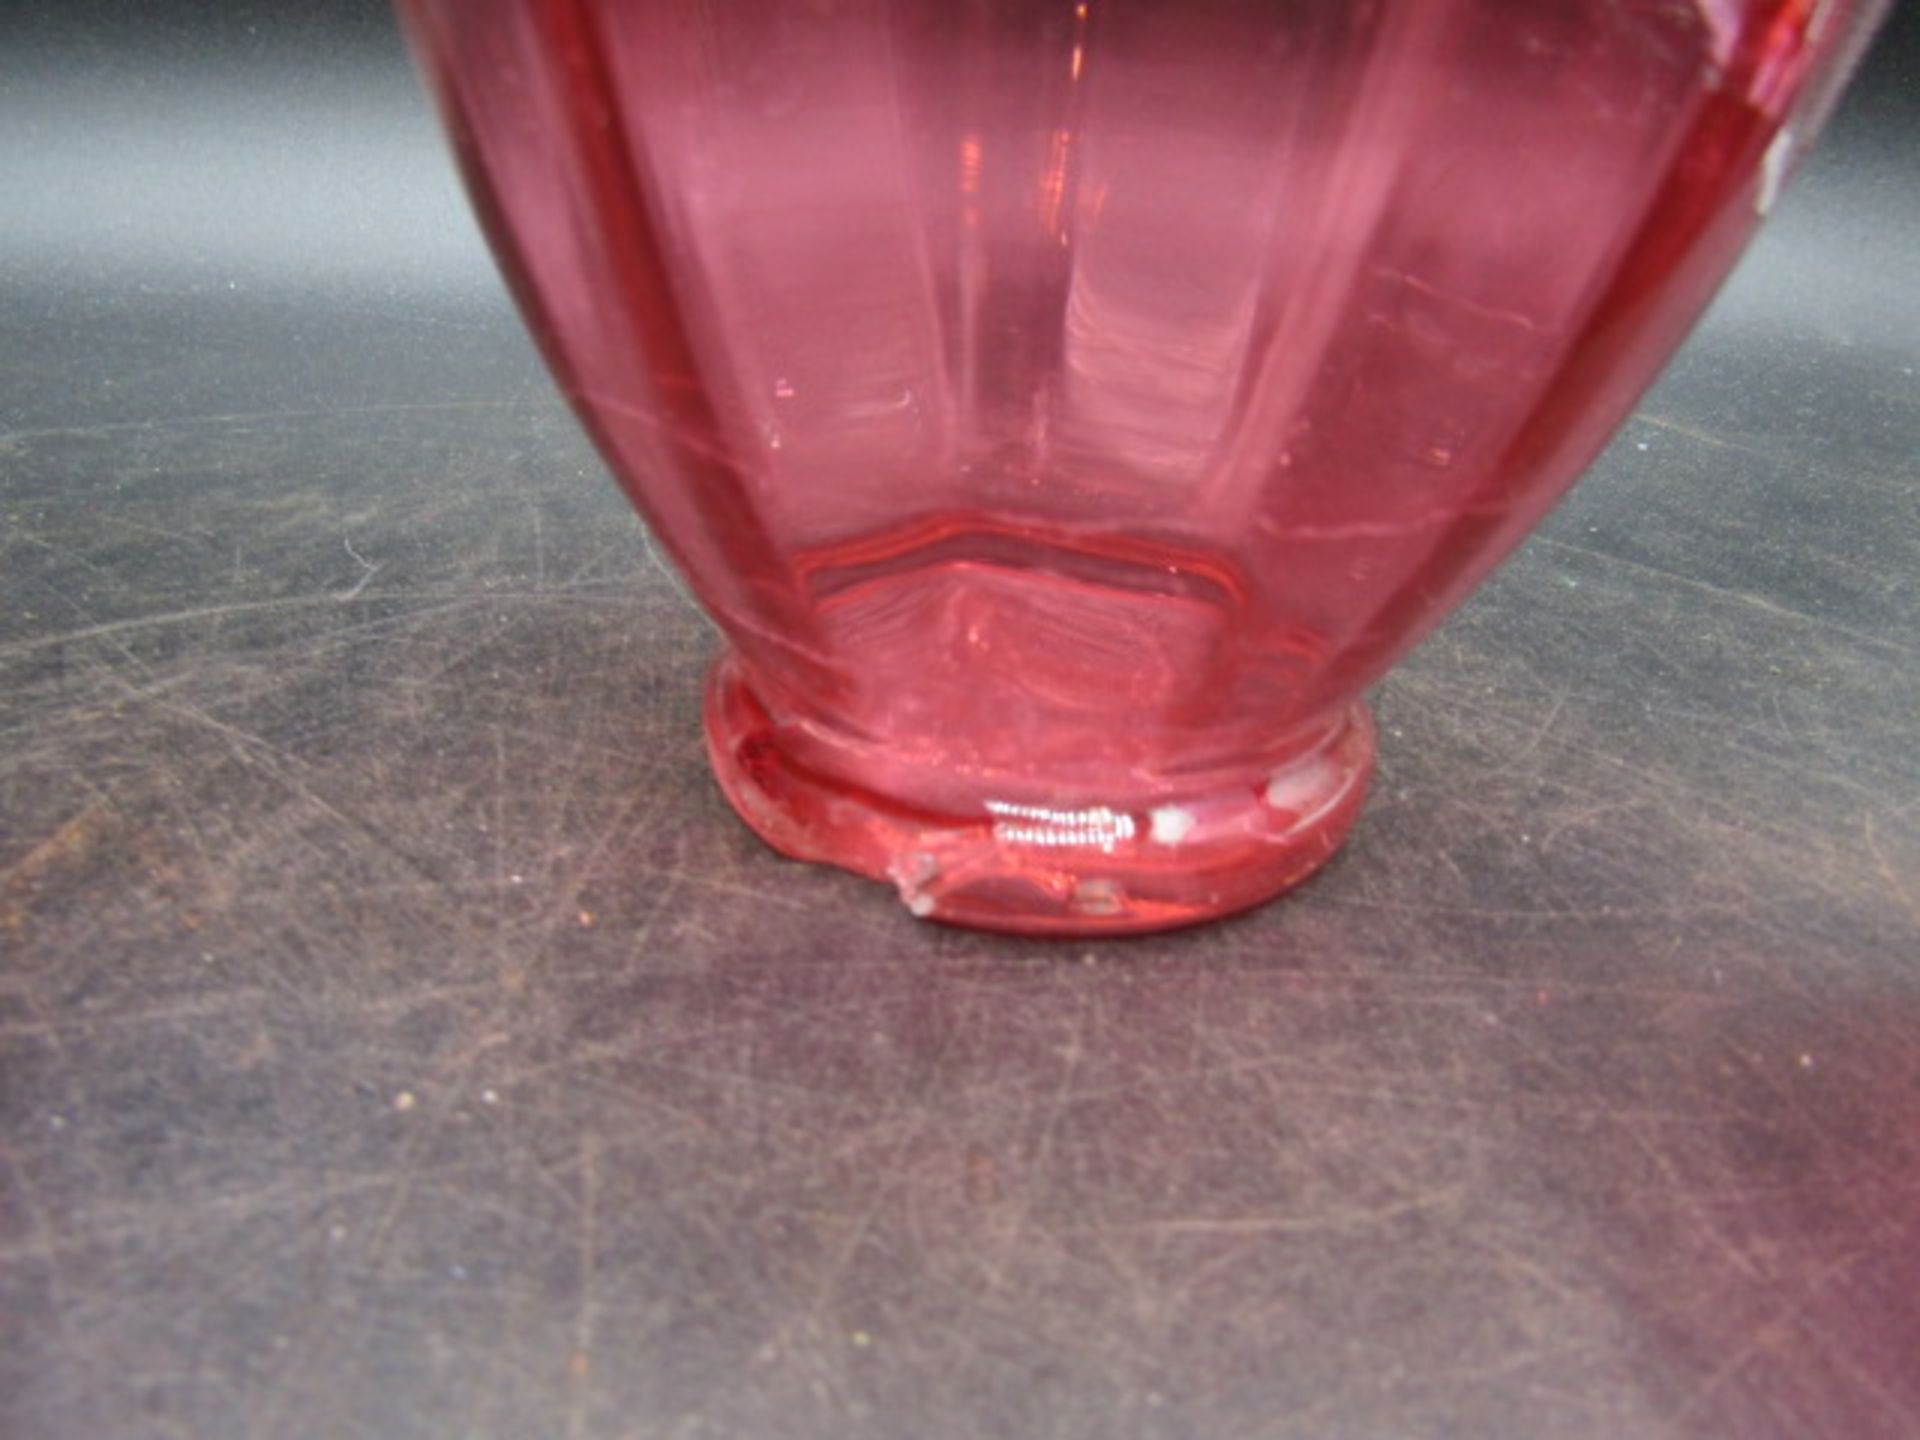 cranberry glass - Image 2 of 3